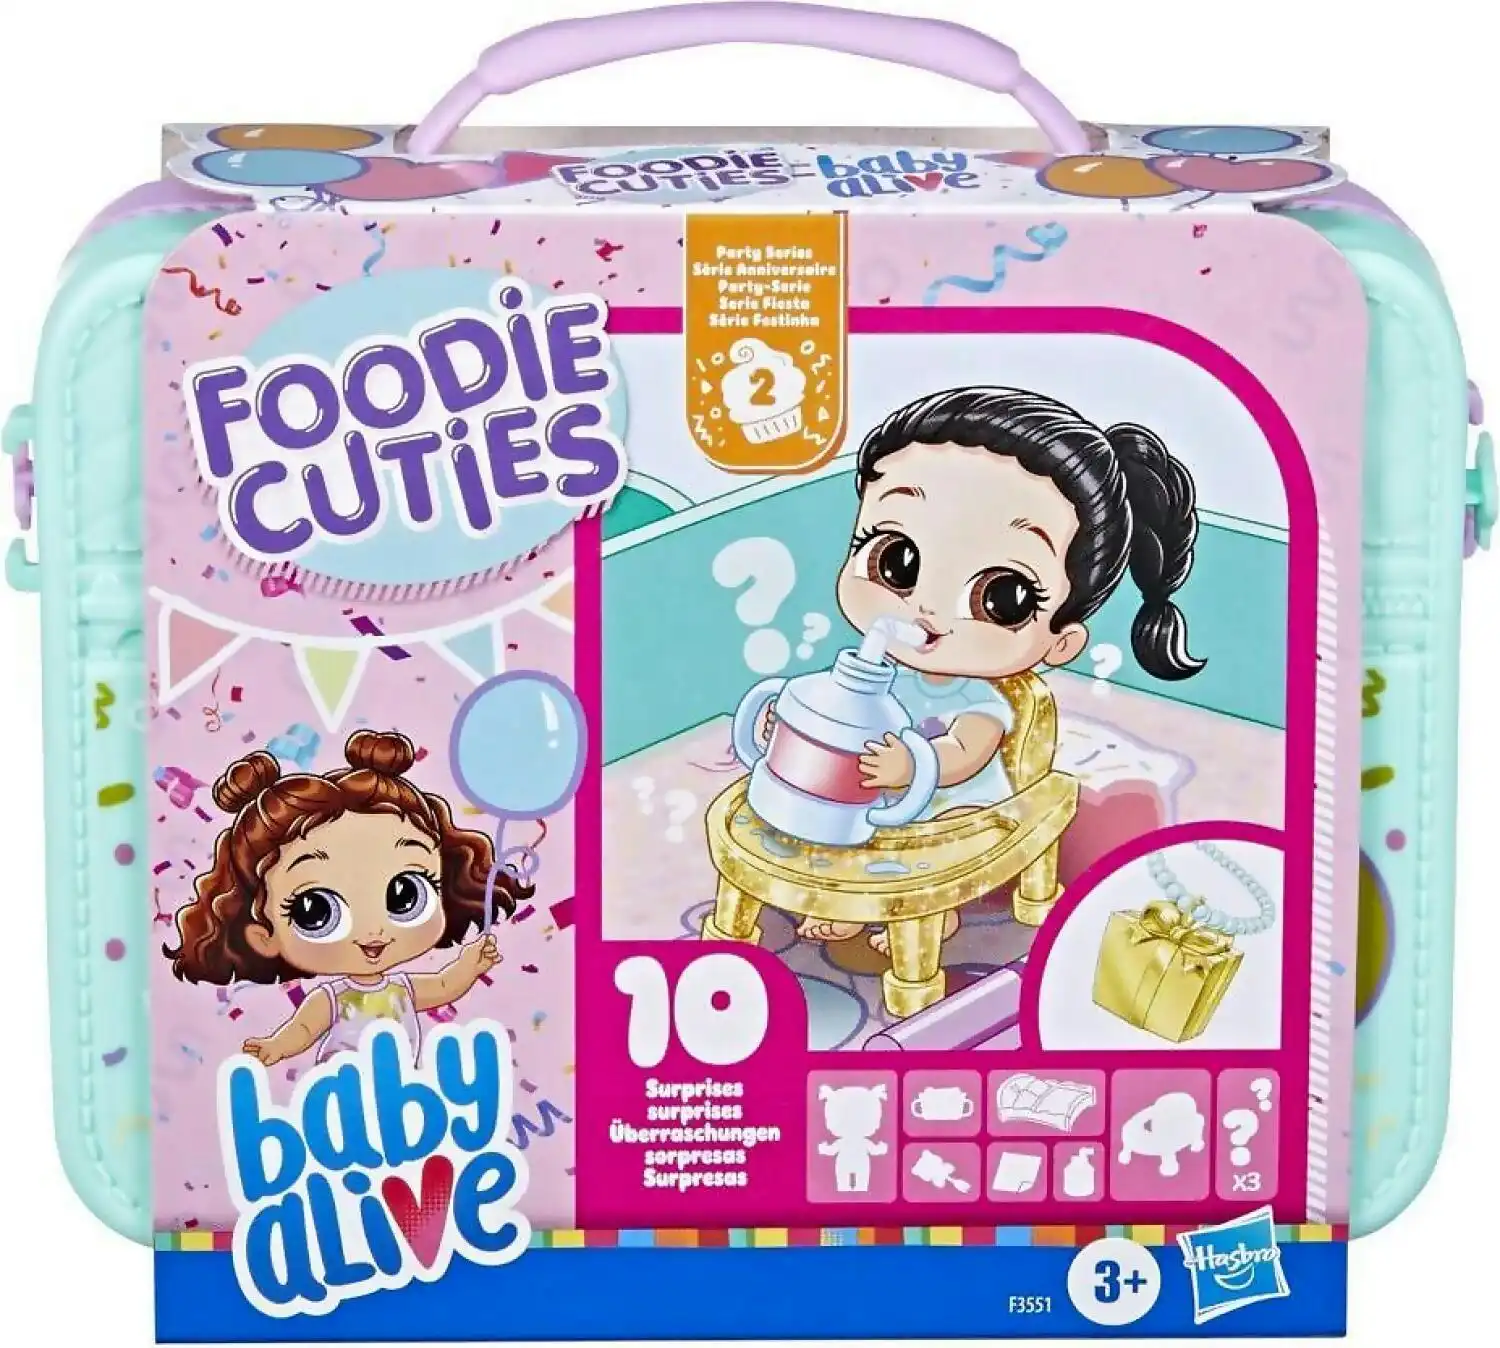 Baby Alive - Foodie Cuties Party Series 2 Surprise Toy 3-inch Doll For Kids 3 And Up 10 Surprises In Portable Case - Hasbro